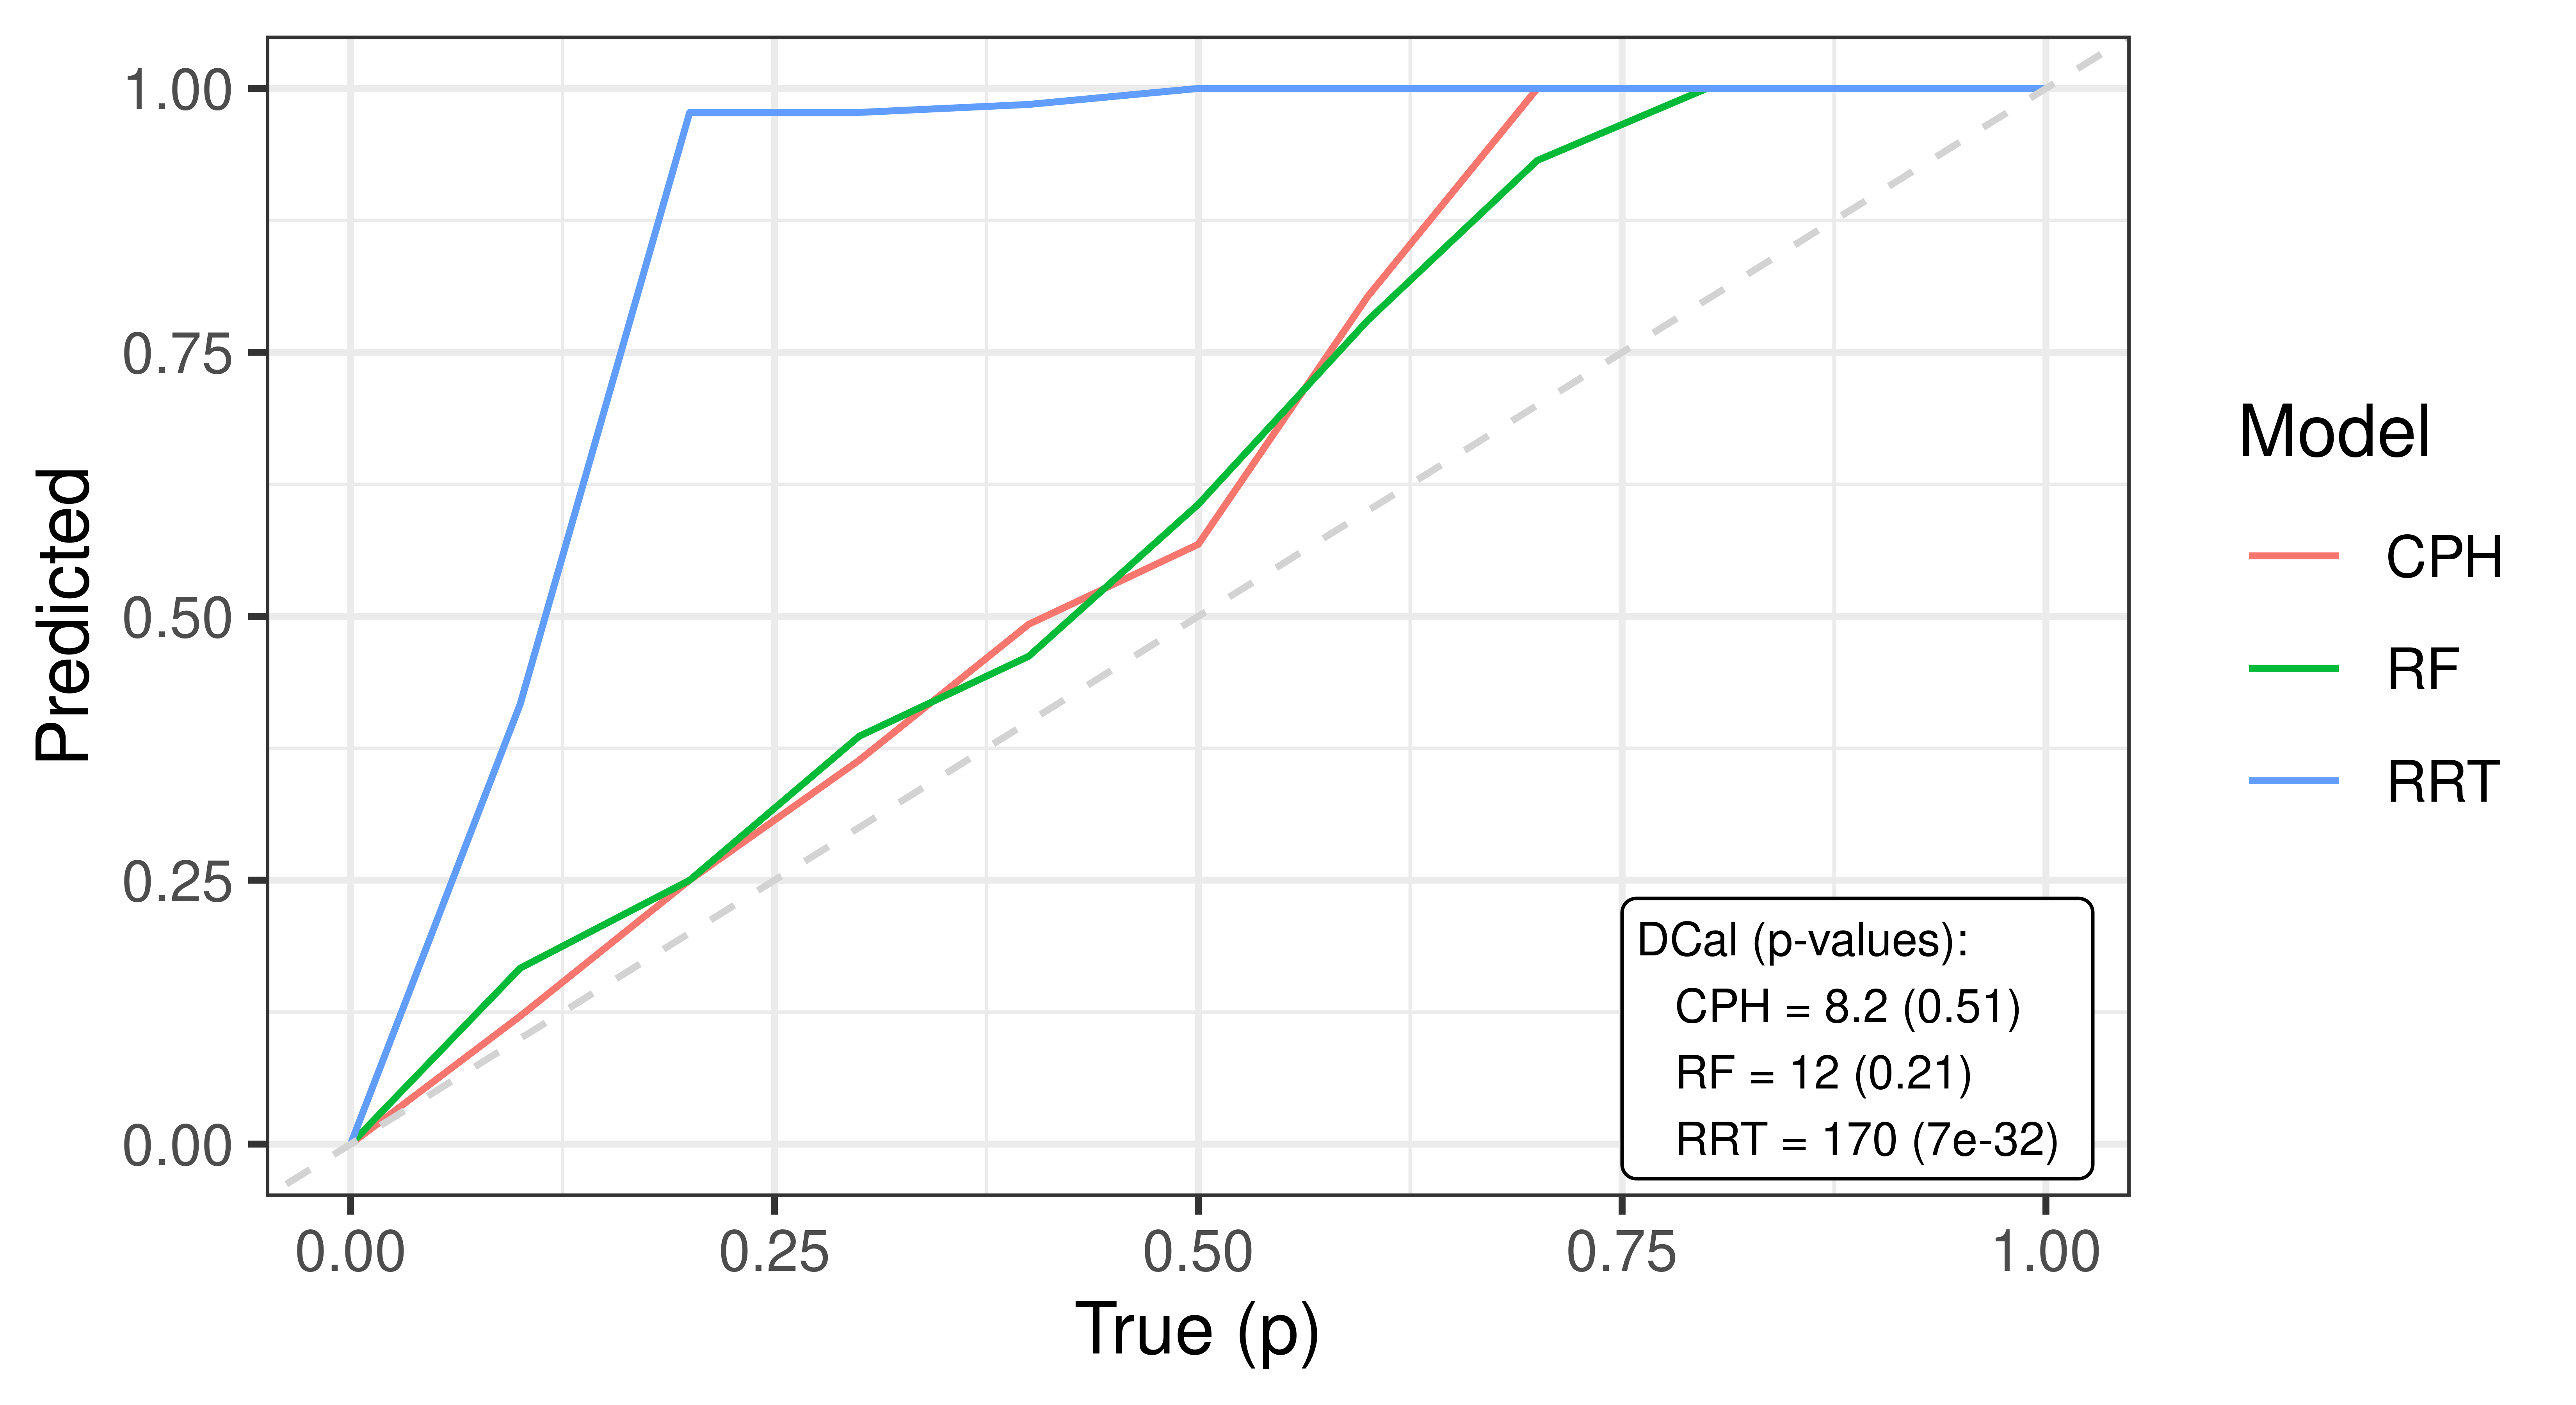 x-axis is labelled 'True (p)' and the y-axis is labelled 'Predicted', both range from 0 to 1. A box in the bottom right says 'DCal (p-values): CPH = 8.2 (0.51); RF = 10 (0.33); RRT = 170 (7e-32). There are four lines on the plot: a blue line (RRT) quickly ascends from (0,0) to (0.1,1) and then is flat; the red (CPH) and green (RF) lines are overlapping and run parallel but not on y=x. Finally a gray dashed line marks the y=x line.